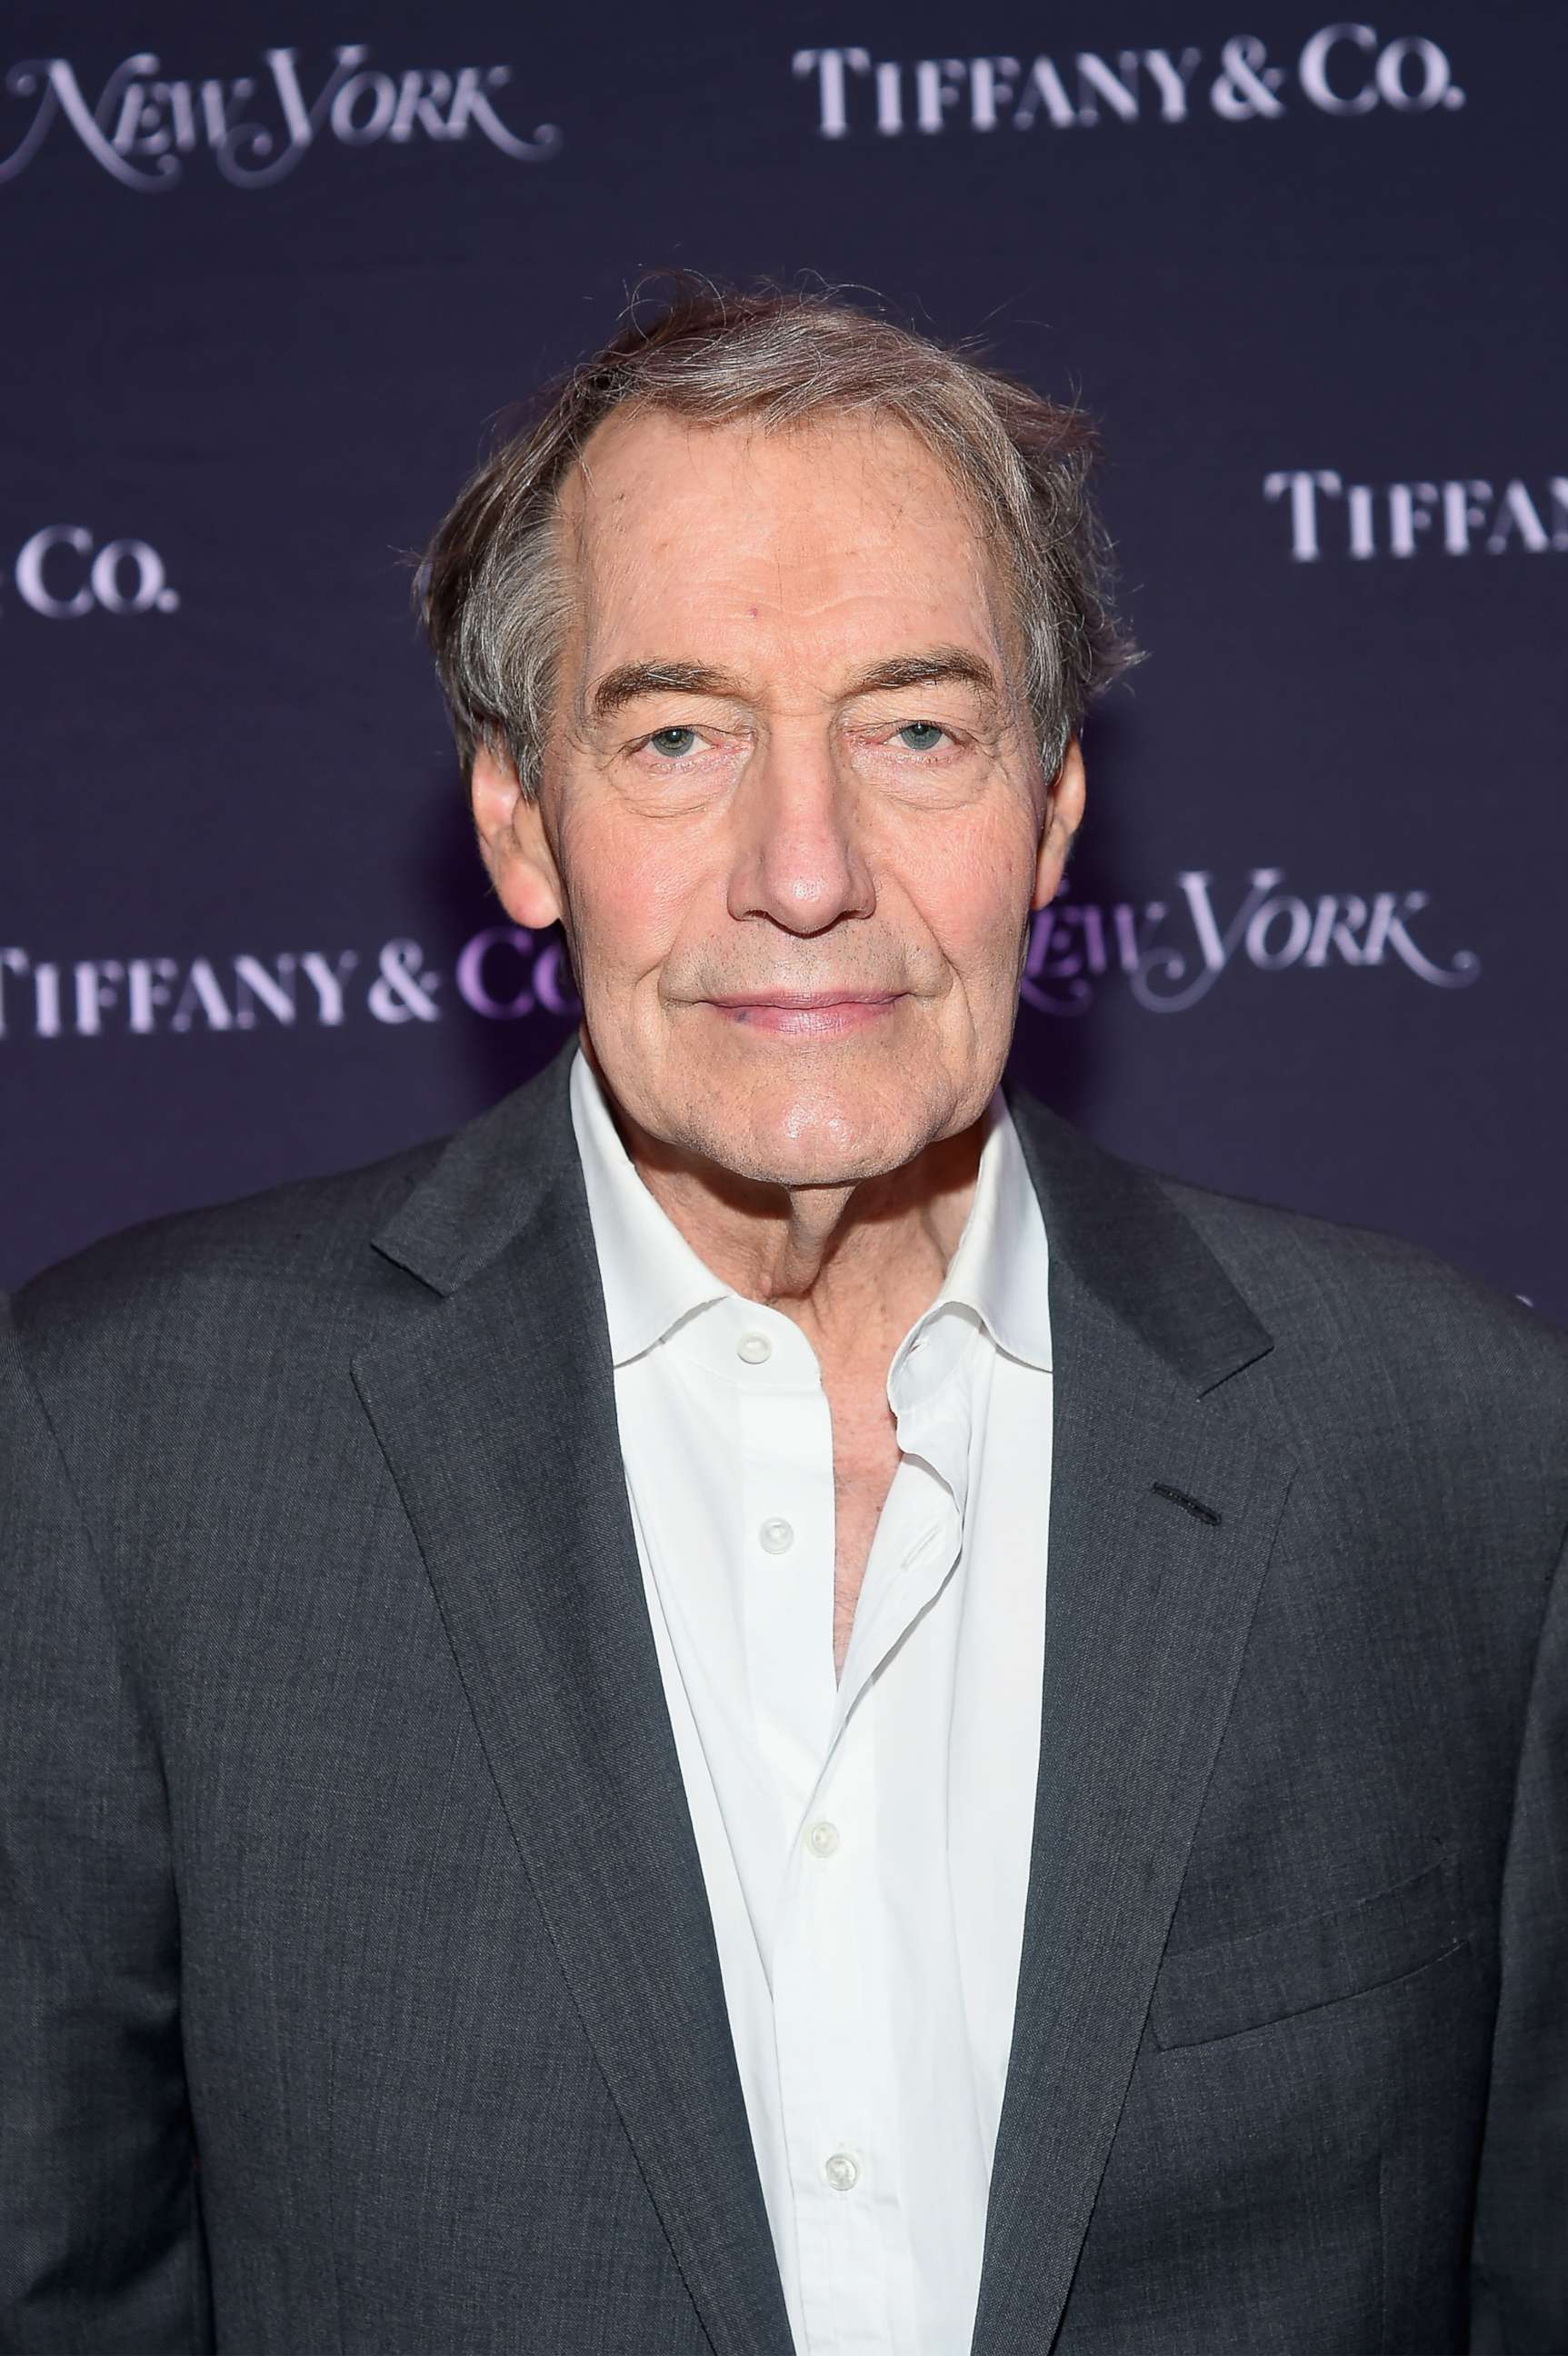 PHOTO: Charlie Rose attends the New York Magazine 50th Anniversary Party at Katz's Delicatessen, Oct. 24, 201, in New York City.